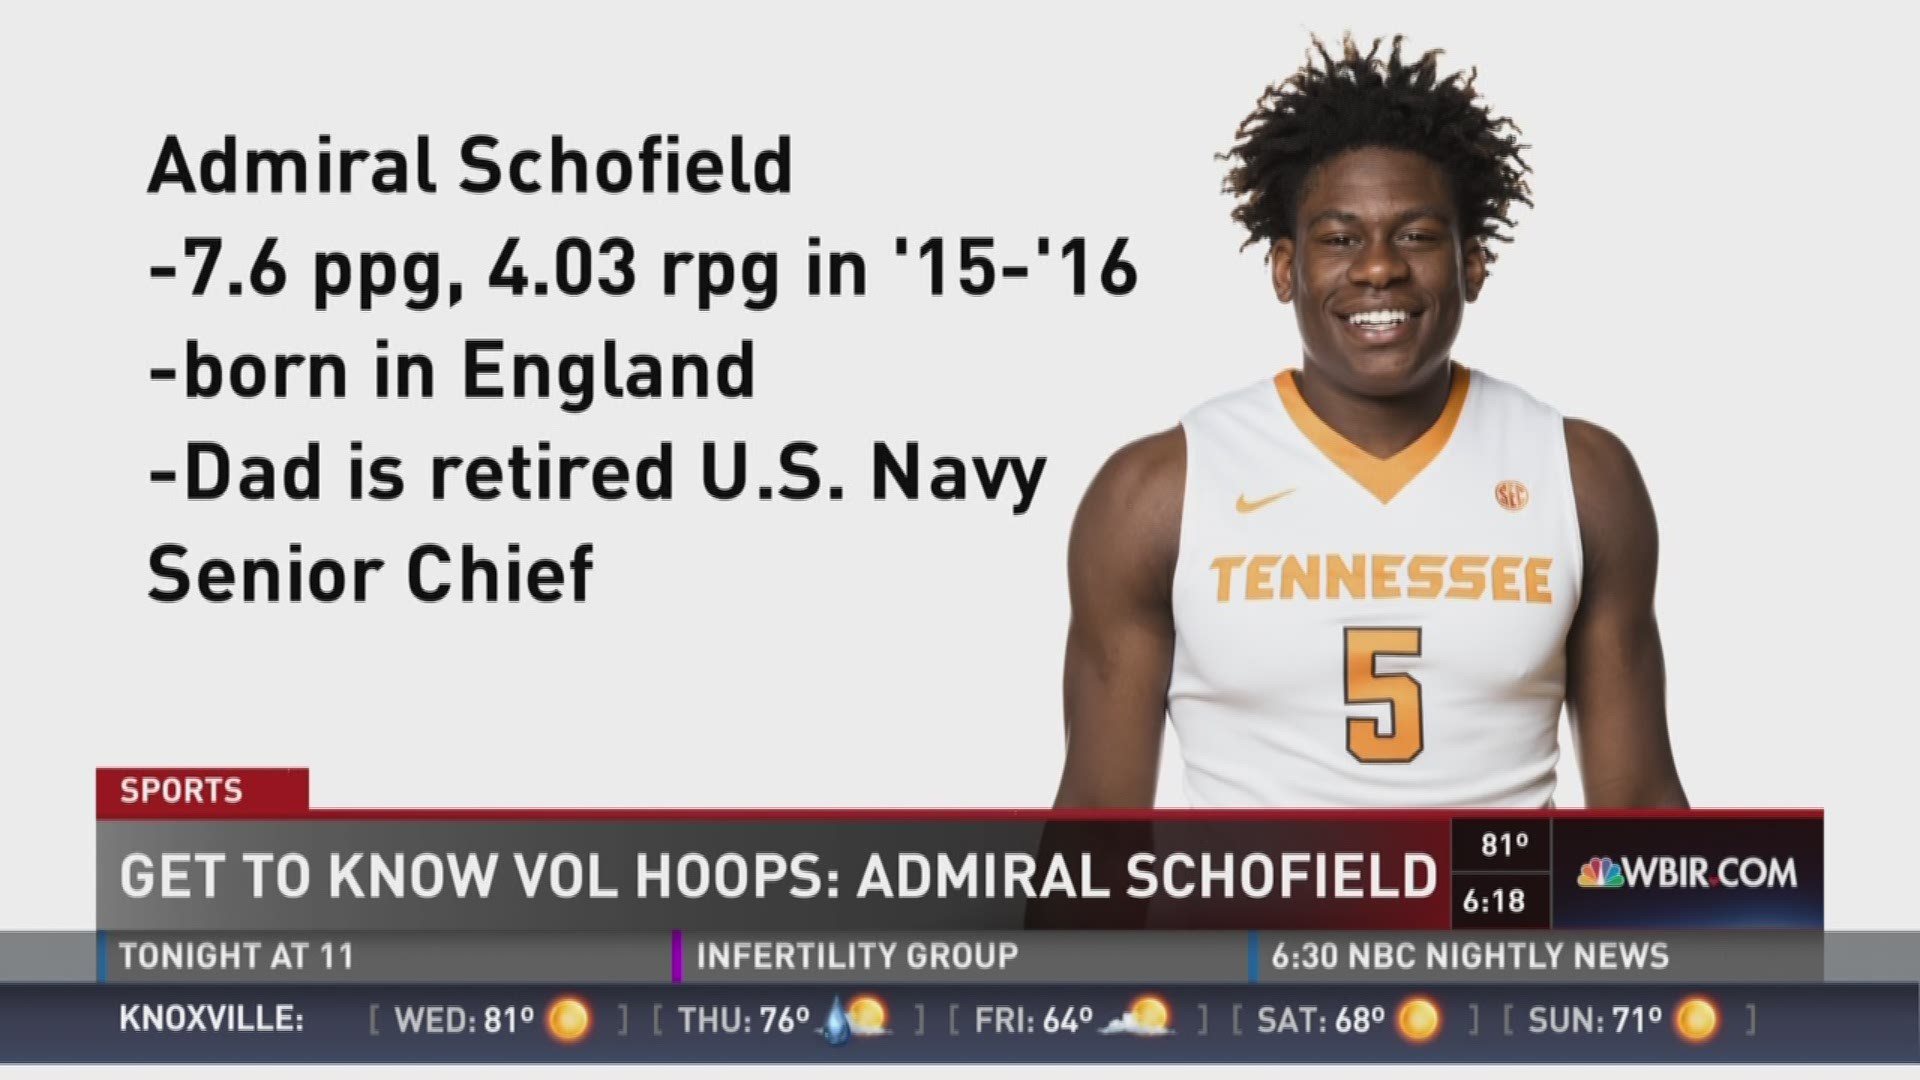 Tennessee sophomore forward Admiral Schofield is an interesting guy with many talents.